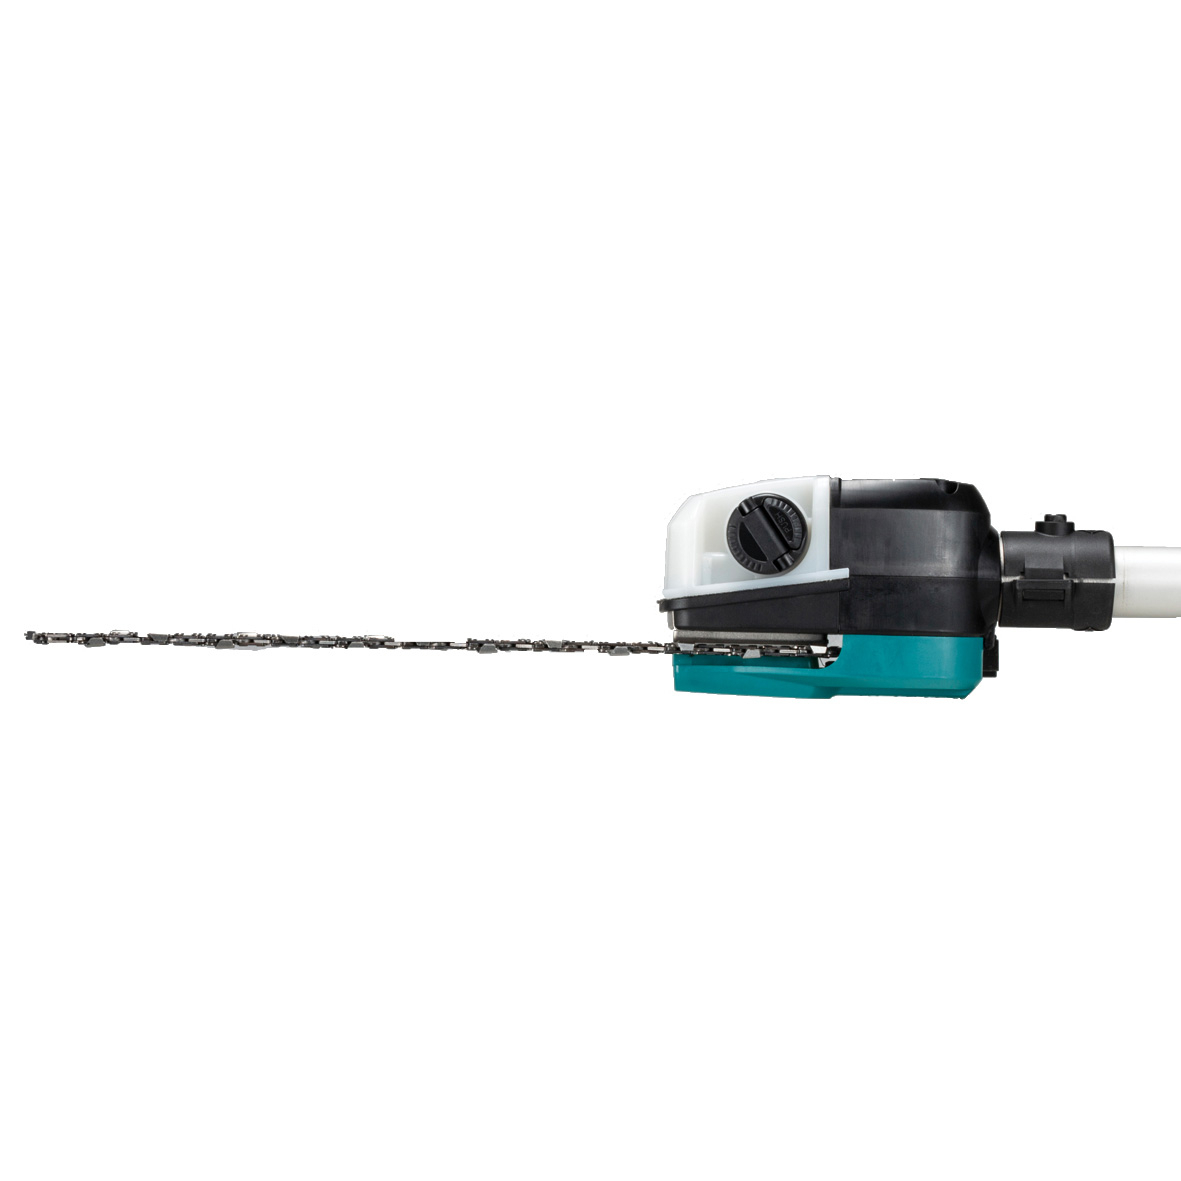 Makita 18Vx2 300mm Brushless Pole Saw (tool only) DUA301Z